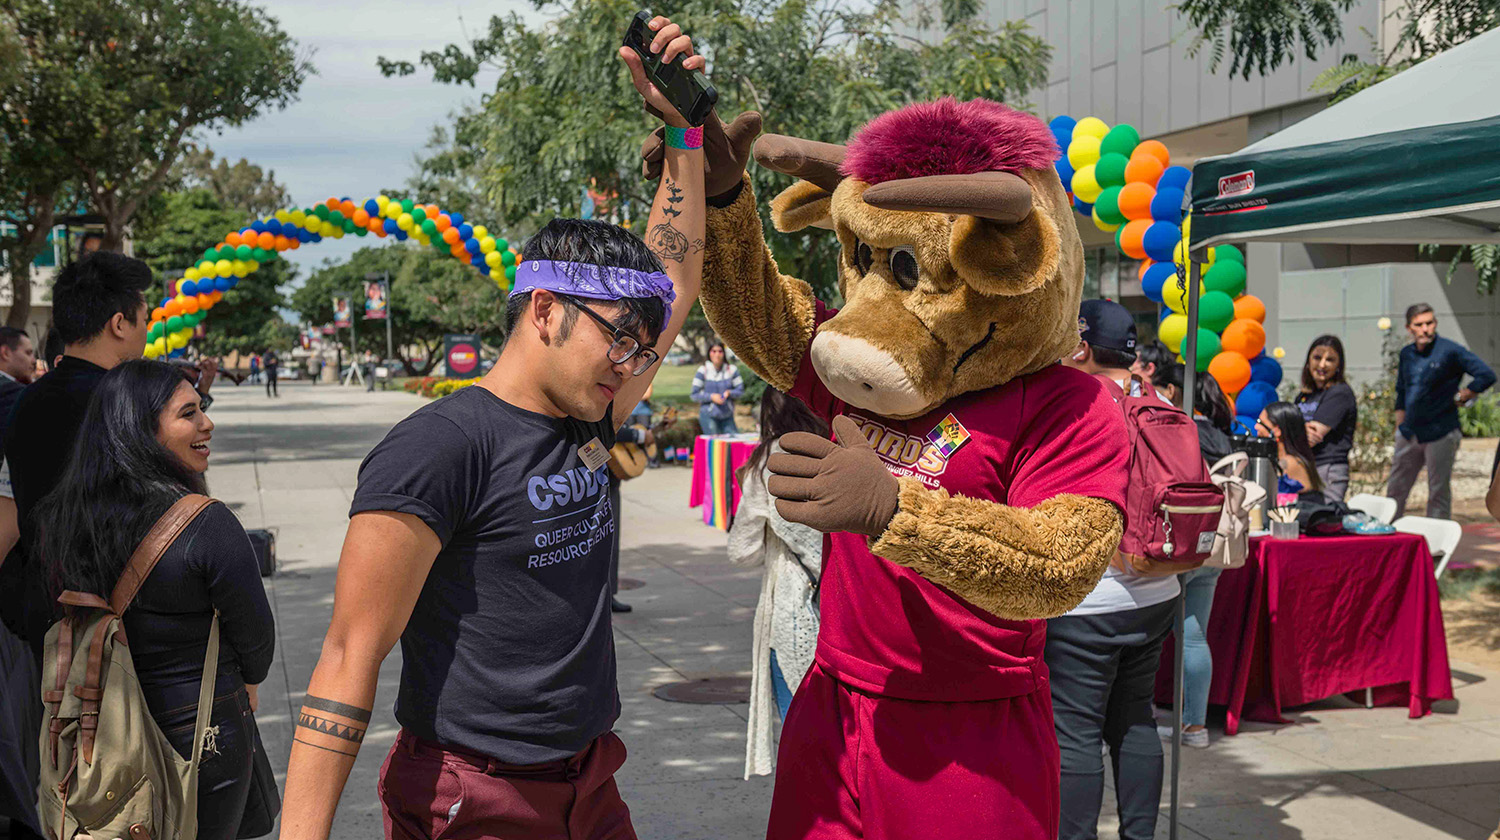 Teddy the Toro joins the celebration at the Queer Culture and Resource Center